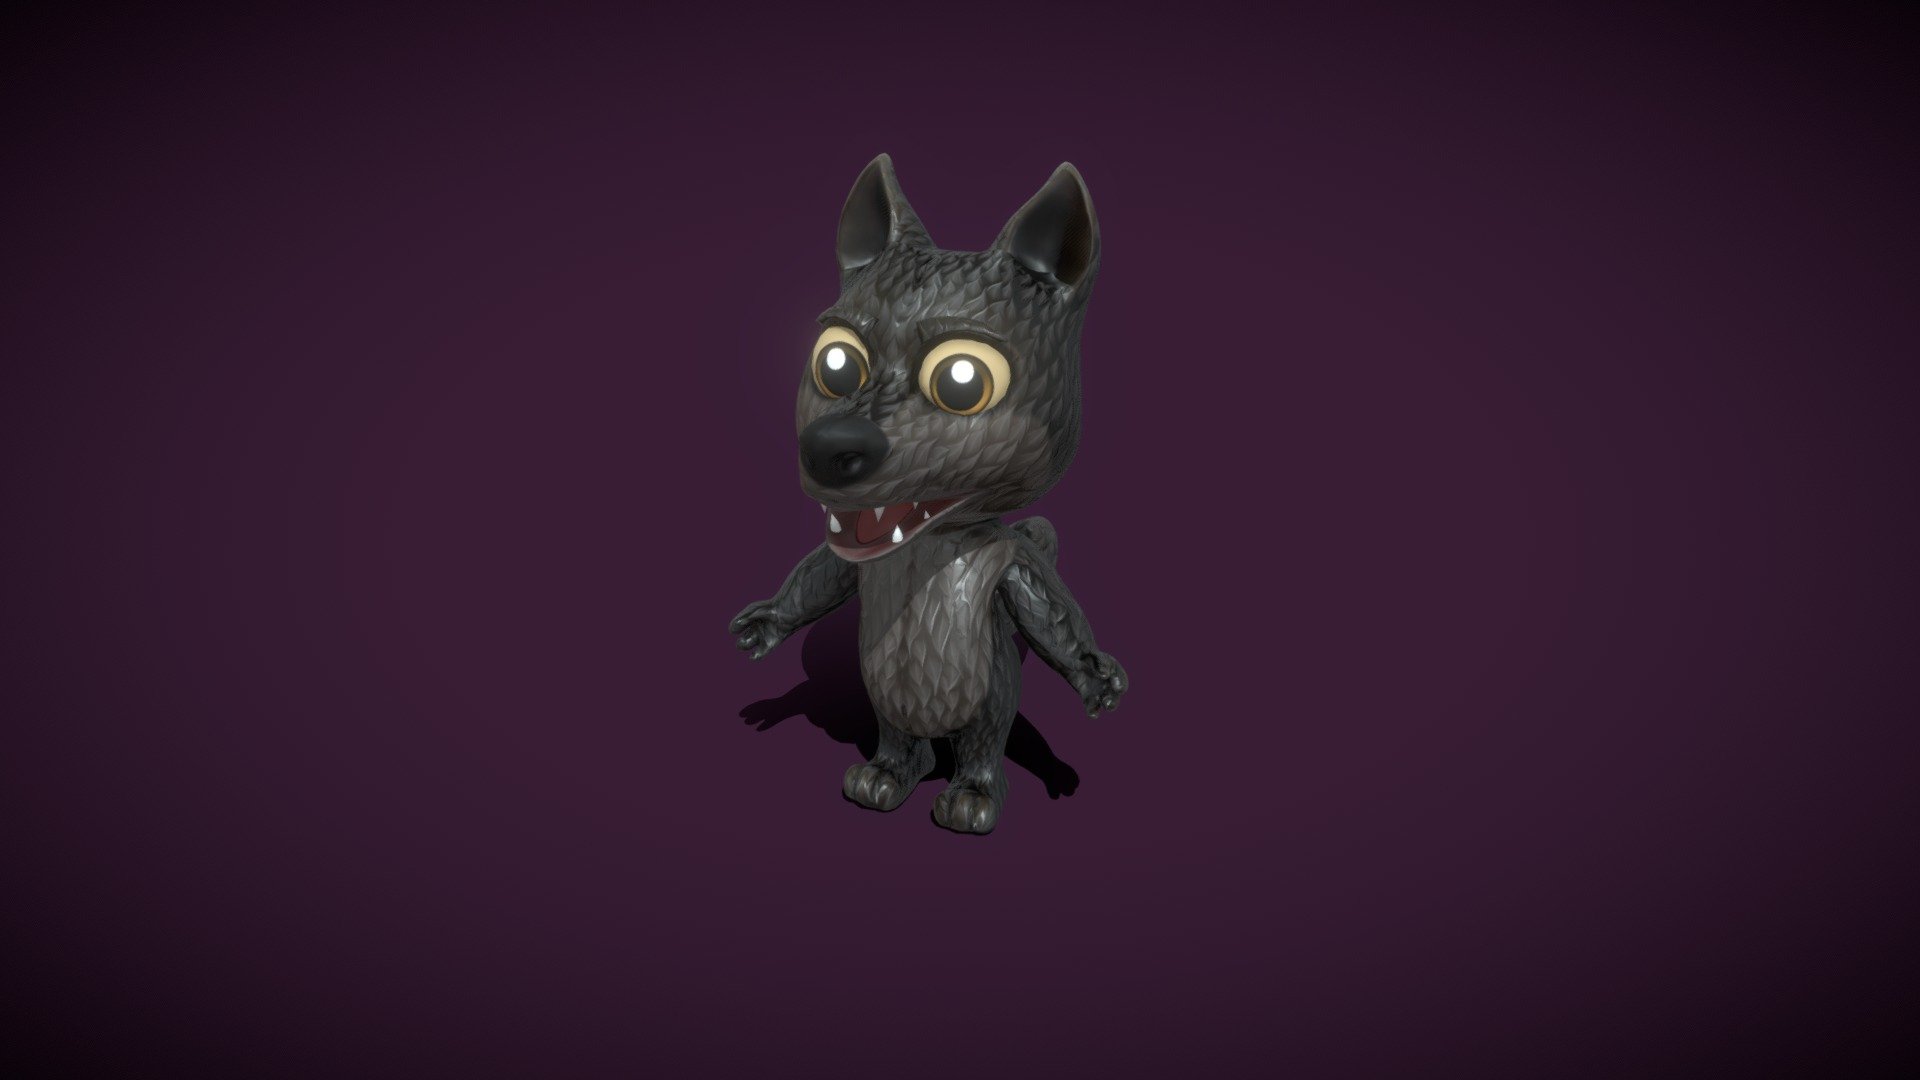 Cartoon Black Wolf Animated 3D Model is completely ready to be used in your games, animations, films, designs etc.  

All textures and materials are included and mapped in every format. The model is completely ready for visualization in any 3d software and engine.  

Technical details:  




File formats included in the package are: FBX, OBJ, GLB, ABC, DAE, PLY, STL, BLEND, gLTF (generated), USDZ (generated)

Native software file format: BLEND

Render engine: Eevee

Polygons: 11,748

Vertices: 11,452

Textures: Color, Metallic, Roughness, Normal, AO

All textures are 2k resolution.

The model is rigged and animated.

7 animations are included: idle, walk, run, talk, howl, sing, dance. All animations are full cycles.

Only following formats contain rig and animation: BLEND, FBX, GLTF/GLB
 - Cartoon Black Wolf Animated 3D Model - Buy Royalty Free 3D model by 3DDisco 3d model